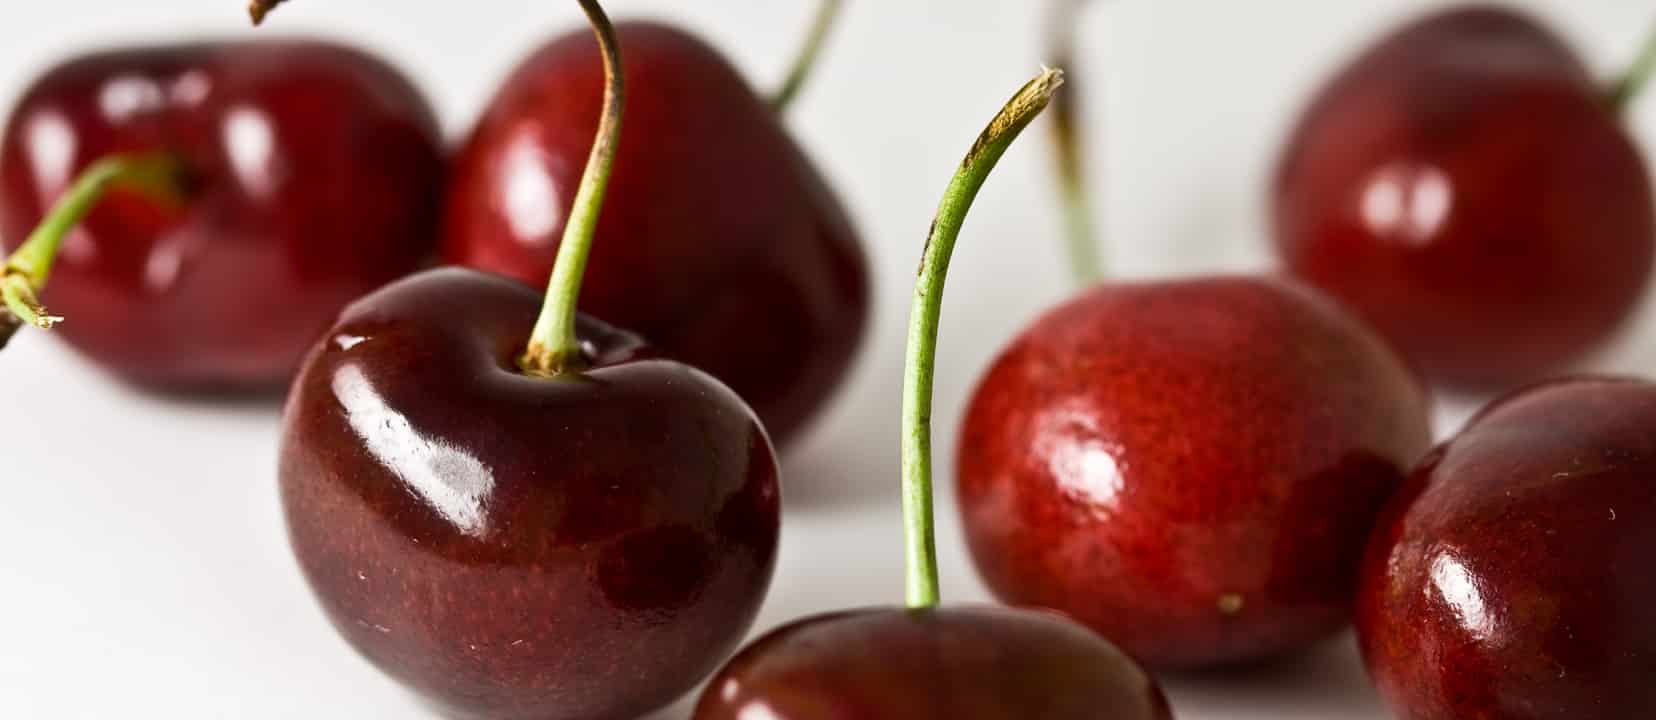 Treating Gout with Cherry Juice